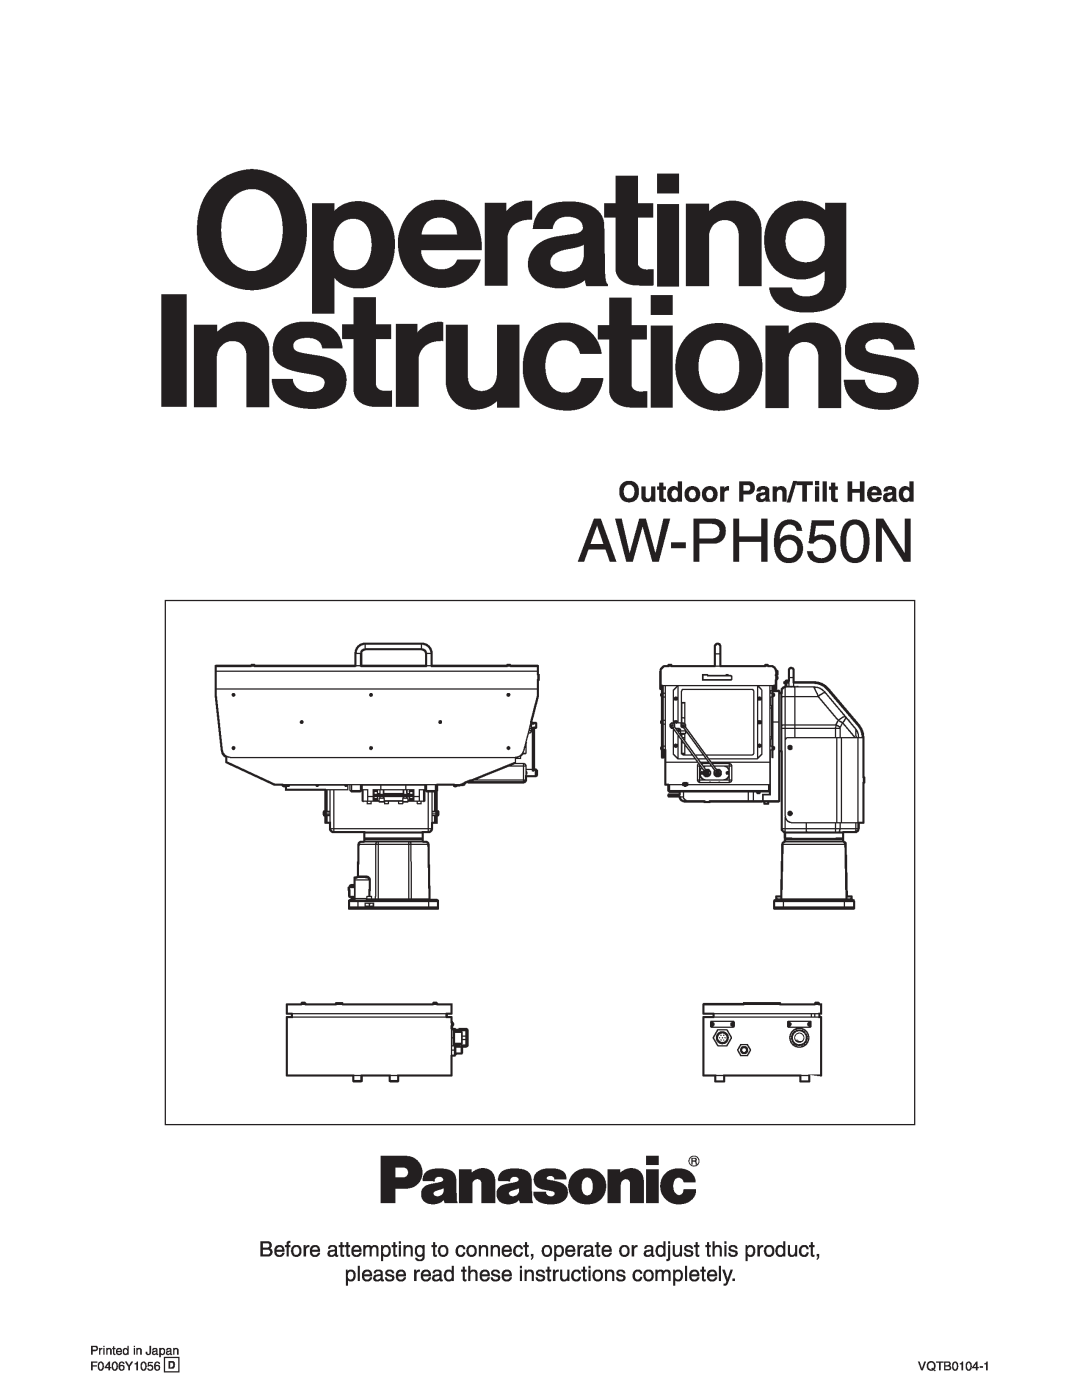 Panasonic AW-PH650N manual Before attempting to connect, operate or adjust this product, Outdoor Pan/Tilt Head, VQTB0104-1 